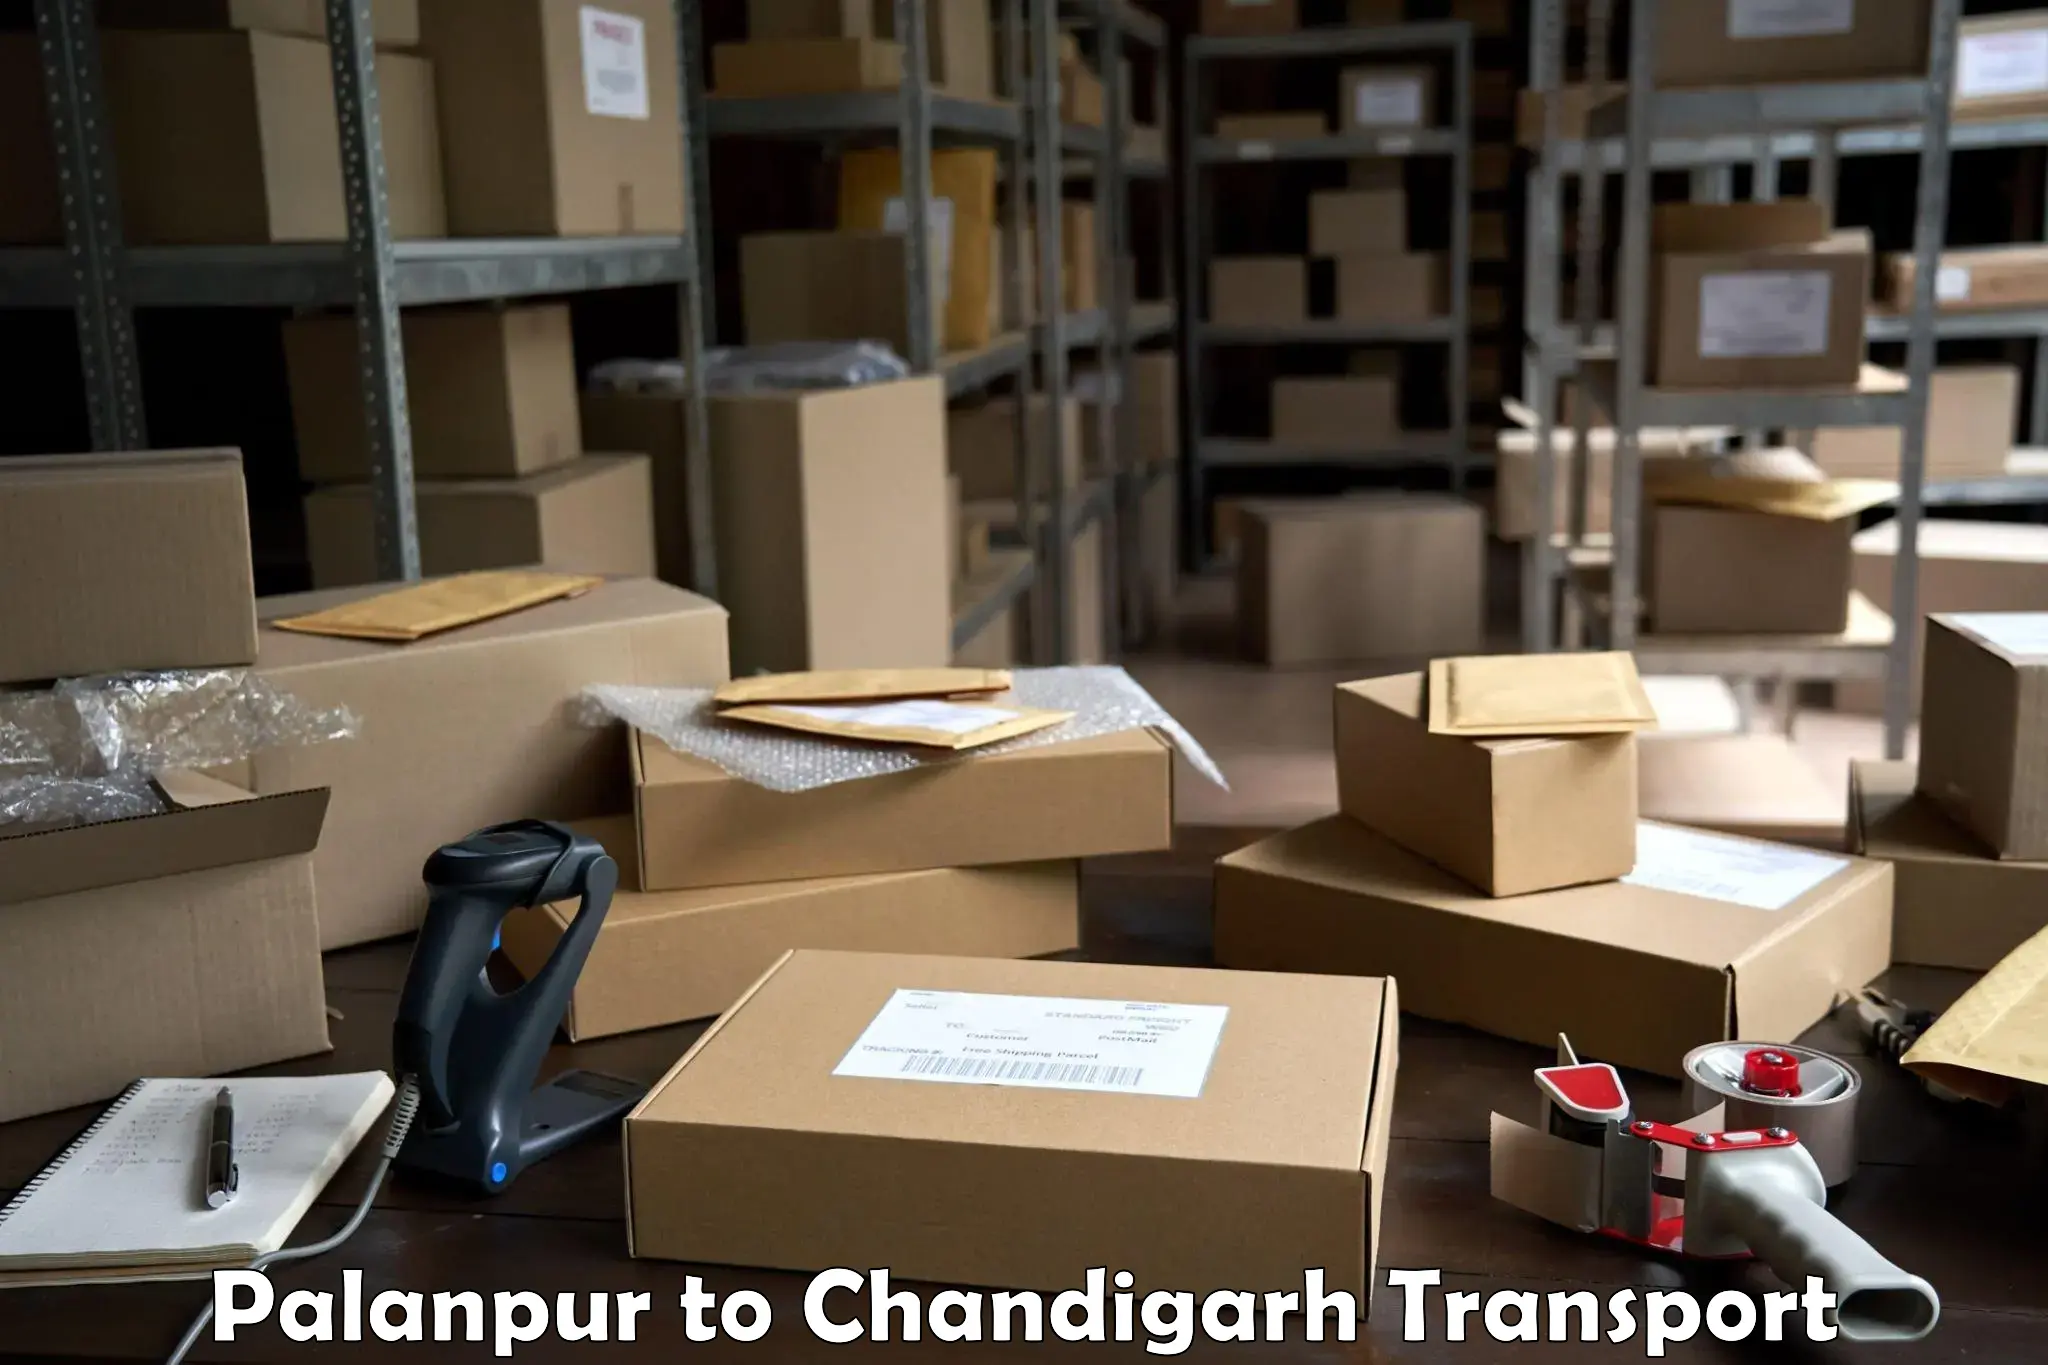 Container transport service Palanpur to Chandigarh